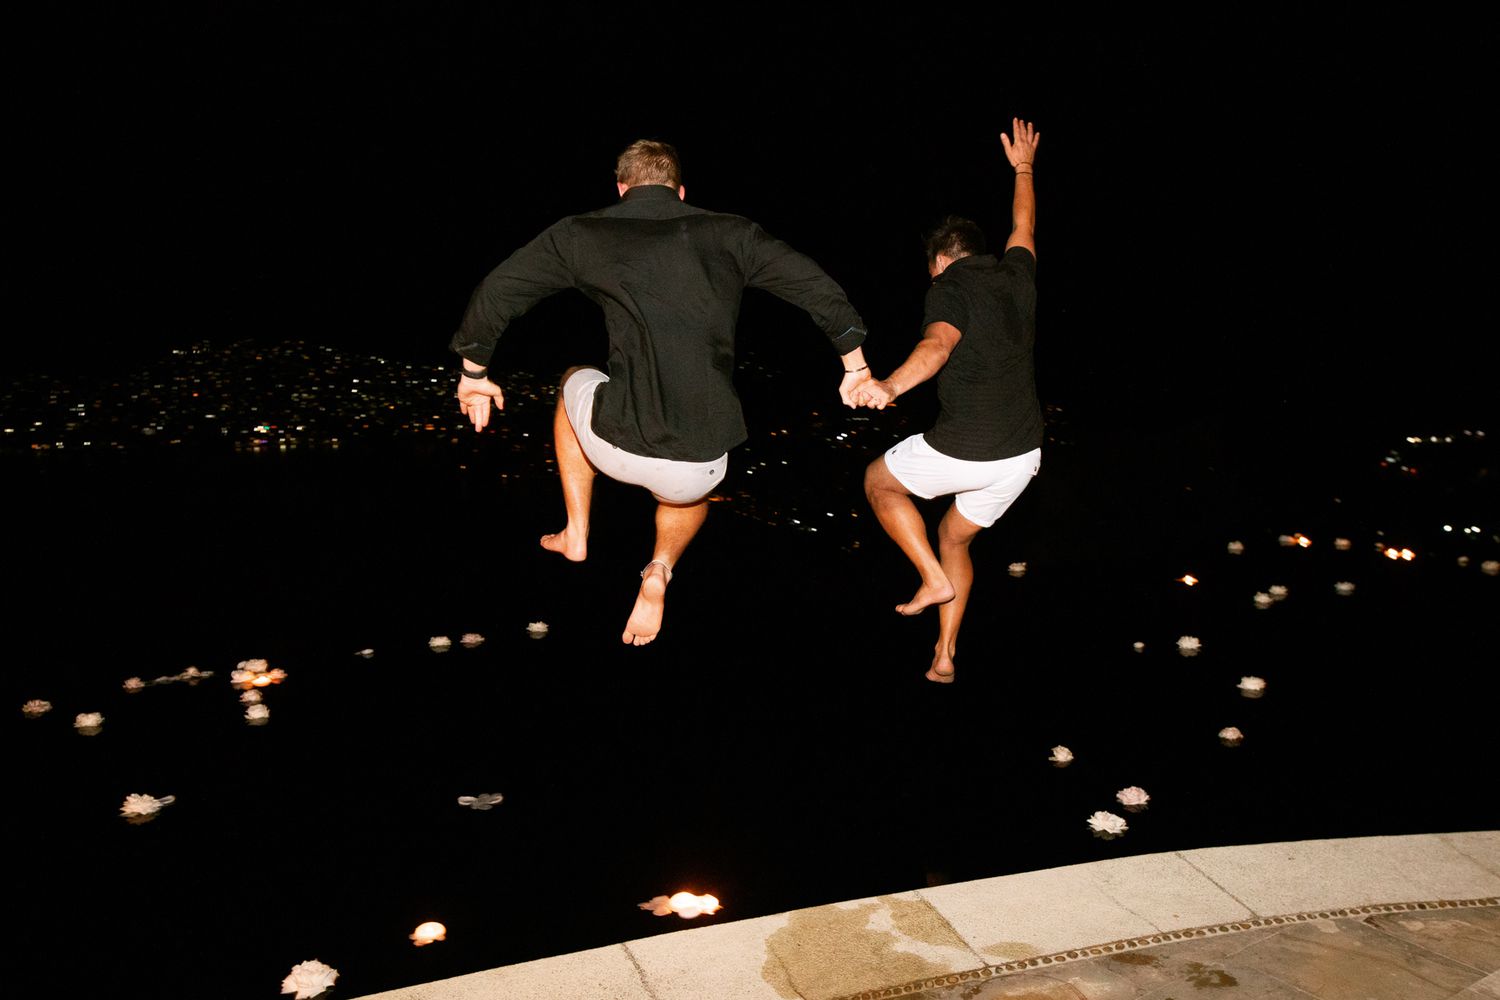 grooms jumping into pool holding hands